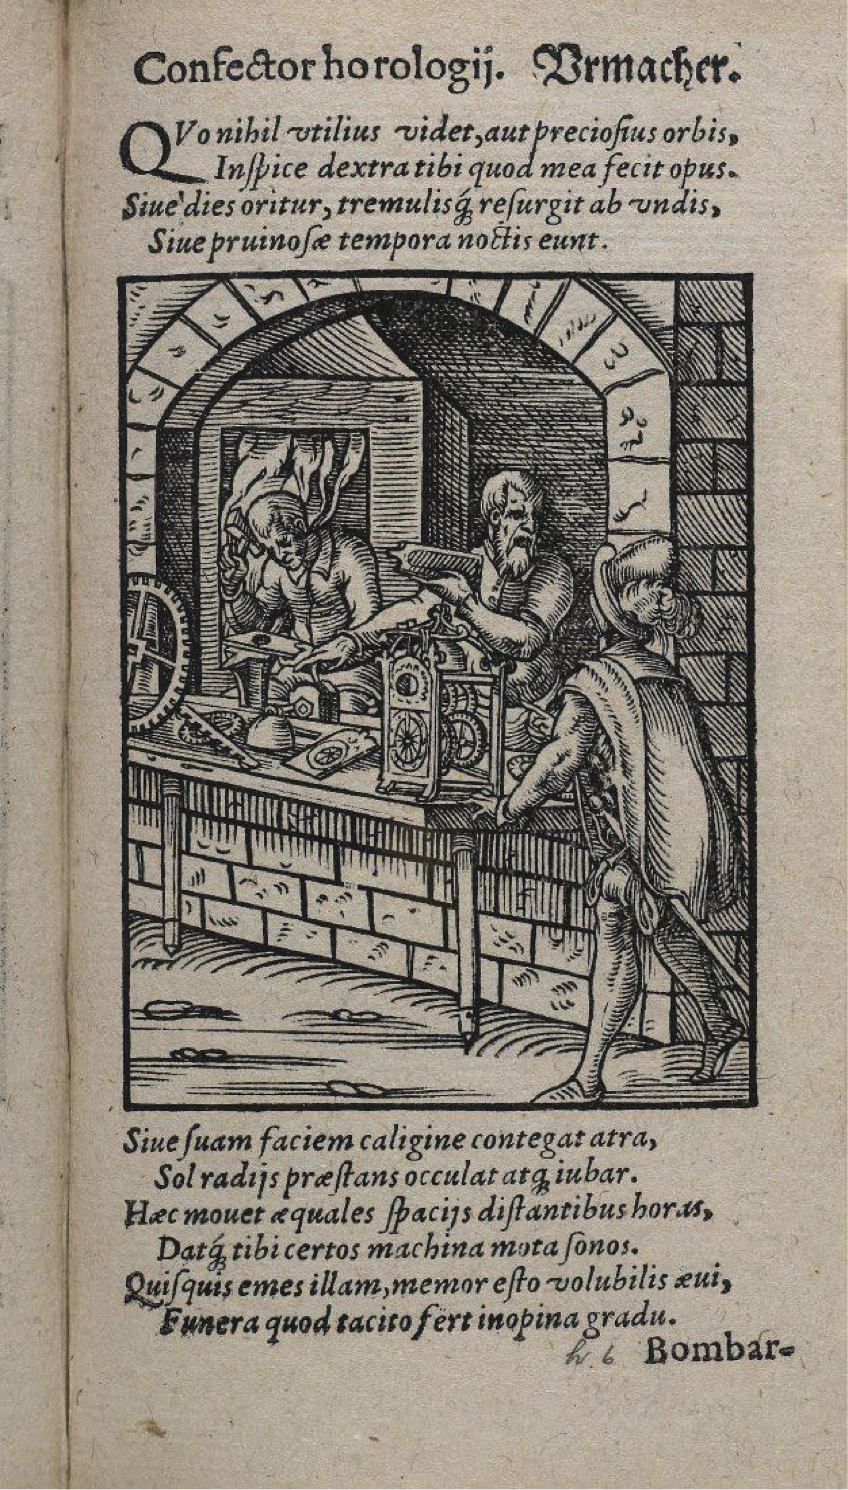 Woodcut illustration titled Confector horologij (Latin) and Urmacher (German), meaning ‘The Clockmaker’. From The Book of Trades (Frankfurt, 1568)